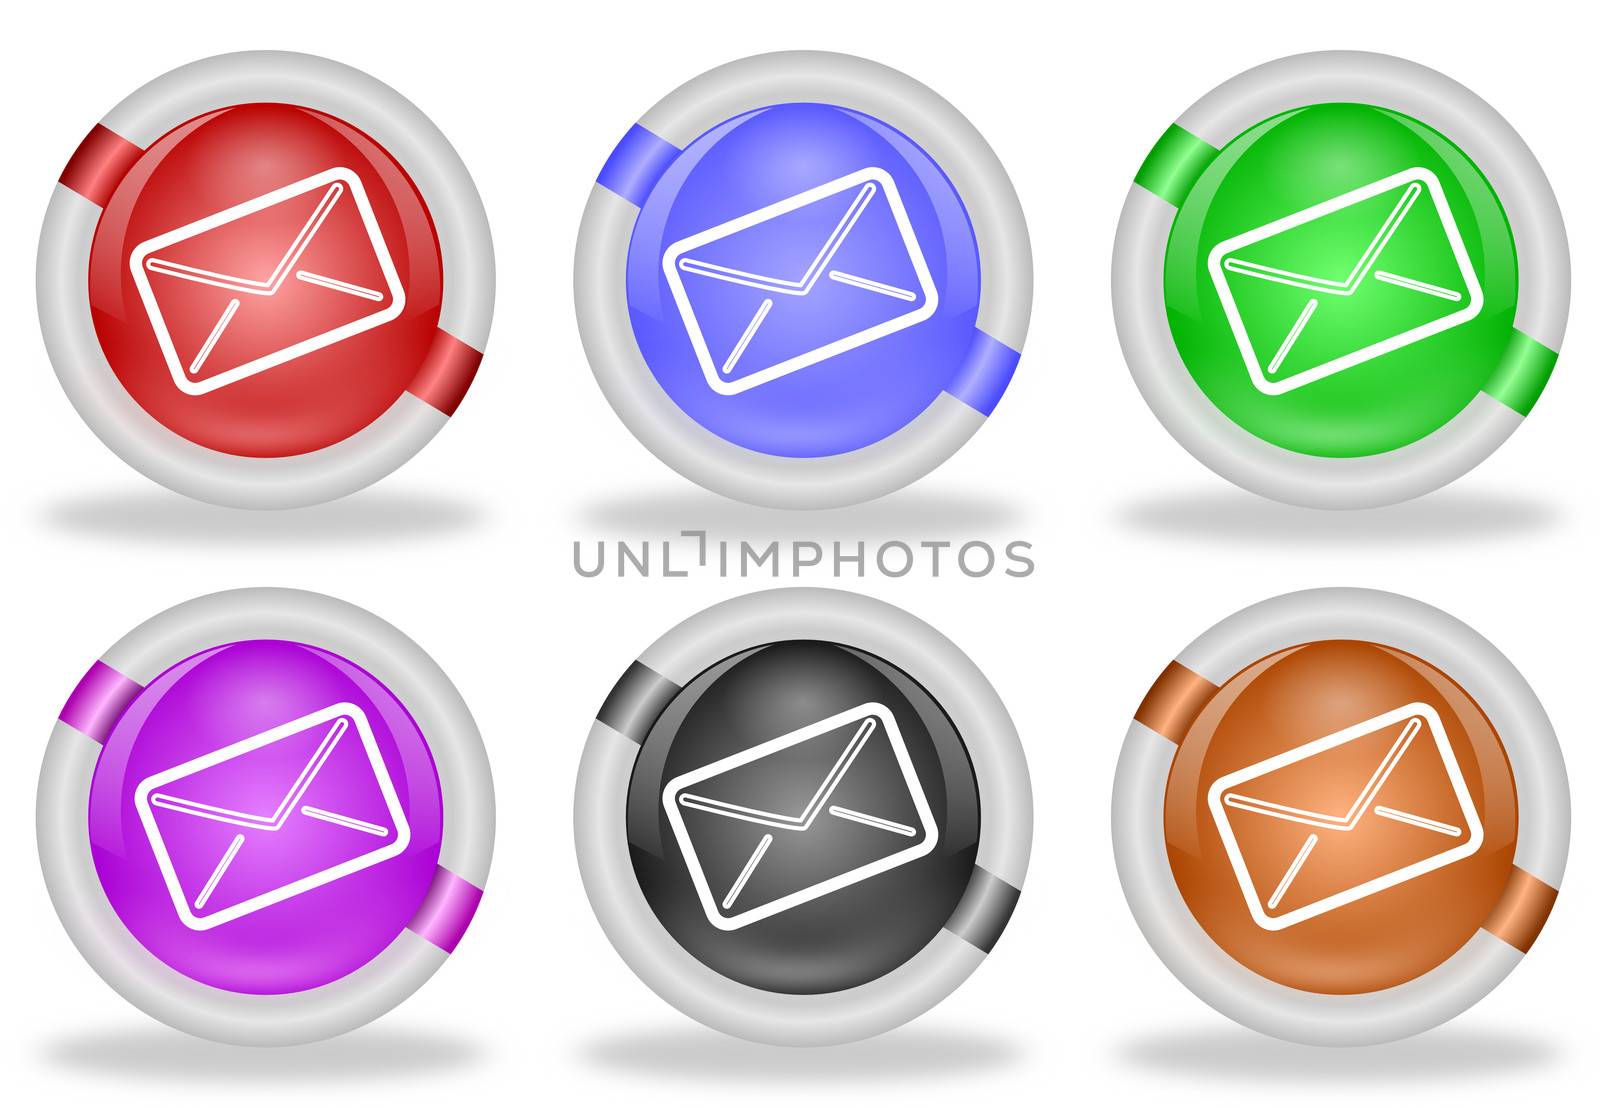 Mail Envelope Web Icon Buttons by RichieThakur